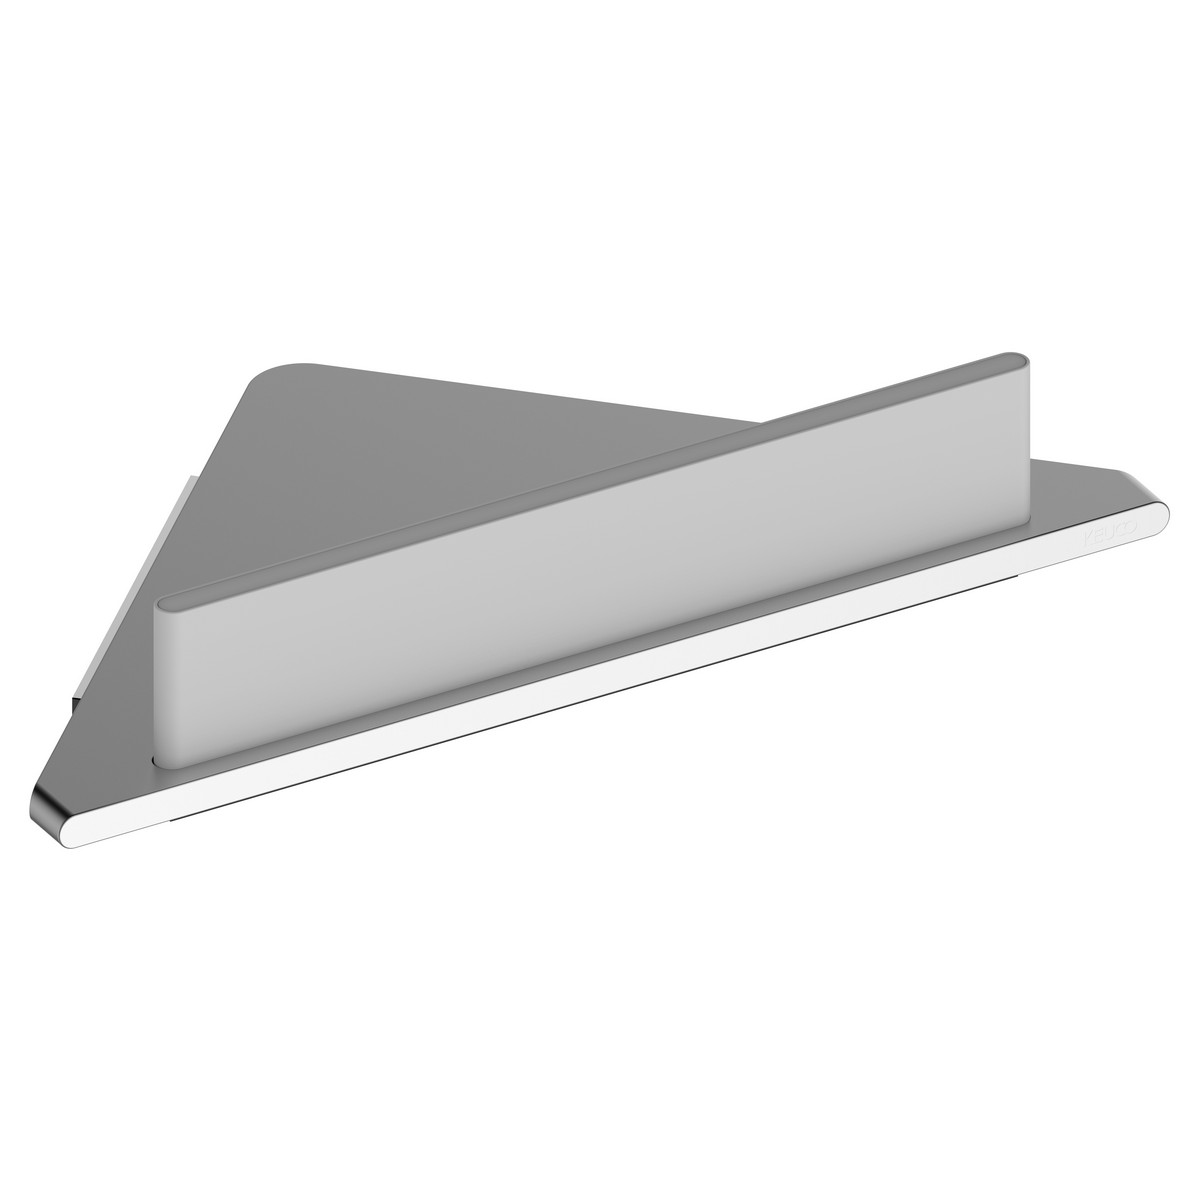 KEUCO 11557170100 EDITION 400 12 7/8 INCH WALL MOUNTED CORNER SHOWER SHELF WITH SQUEEGEE IN ALUMINUM